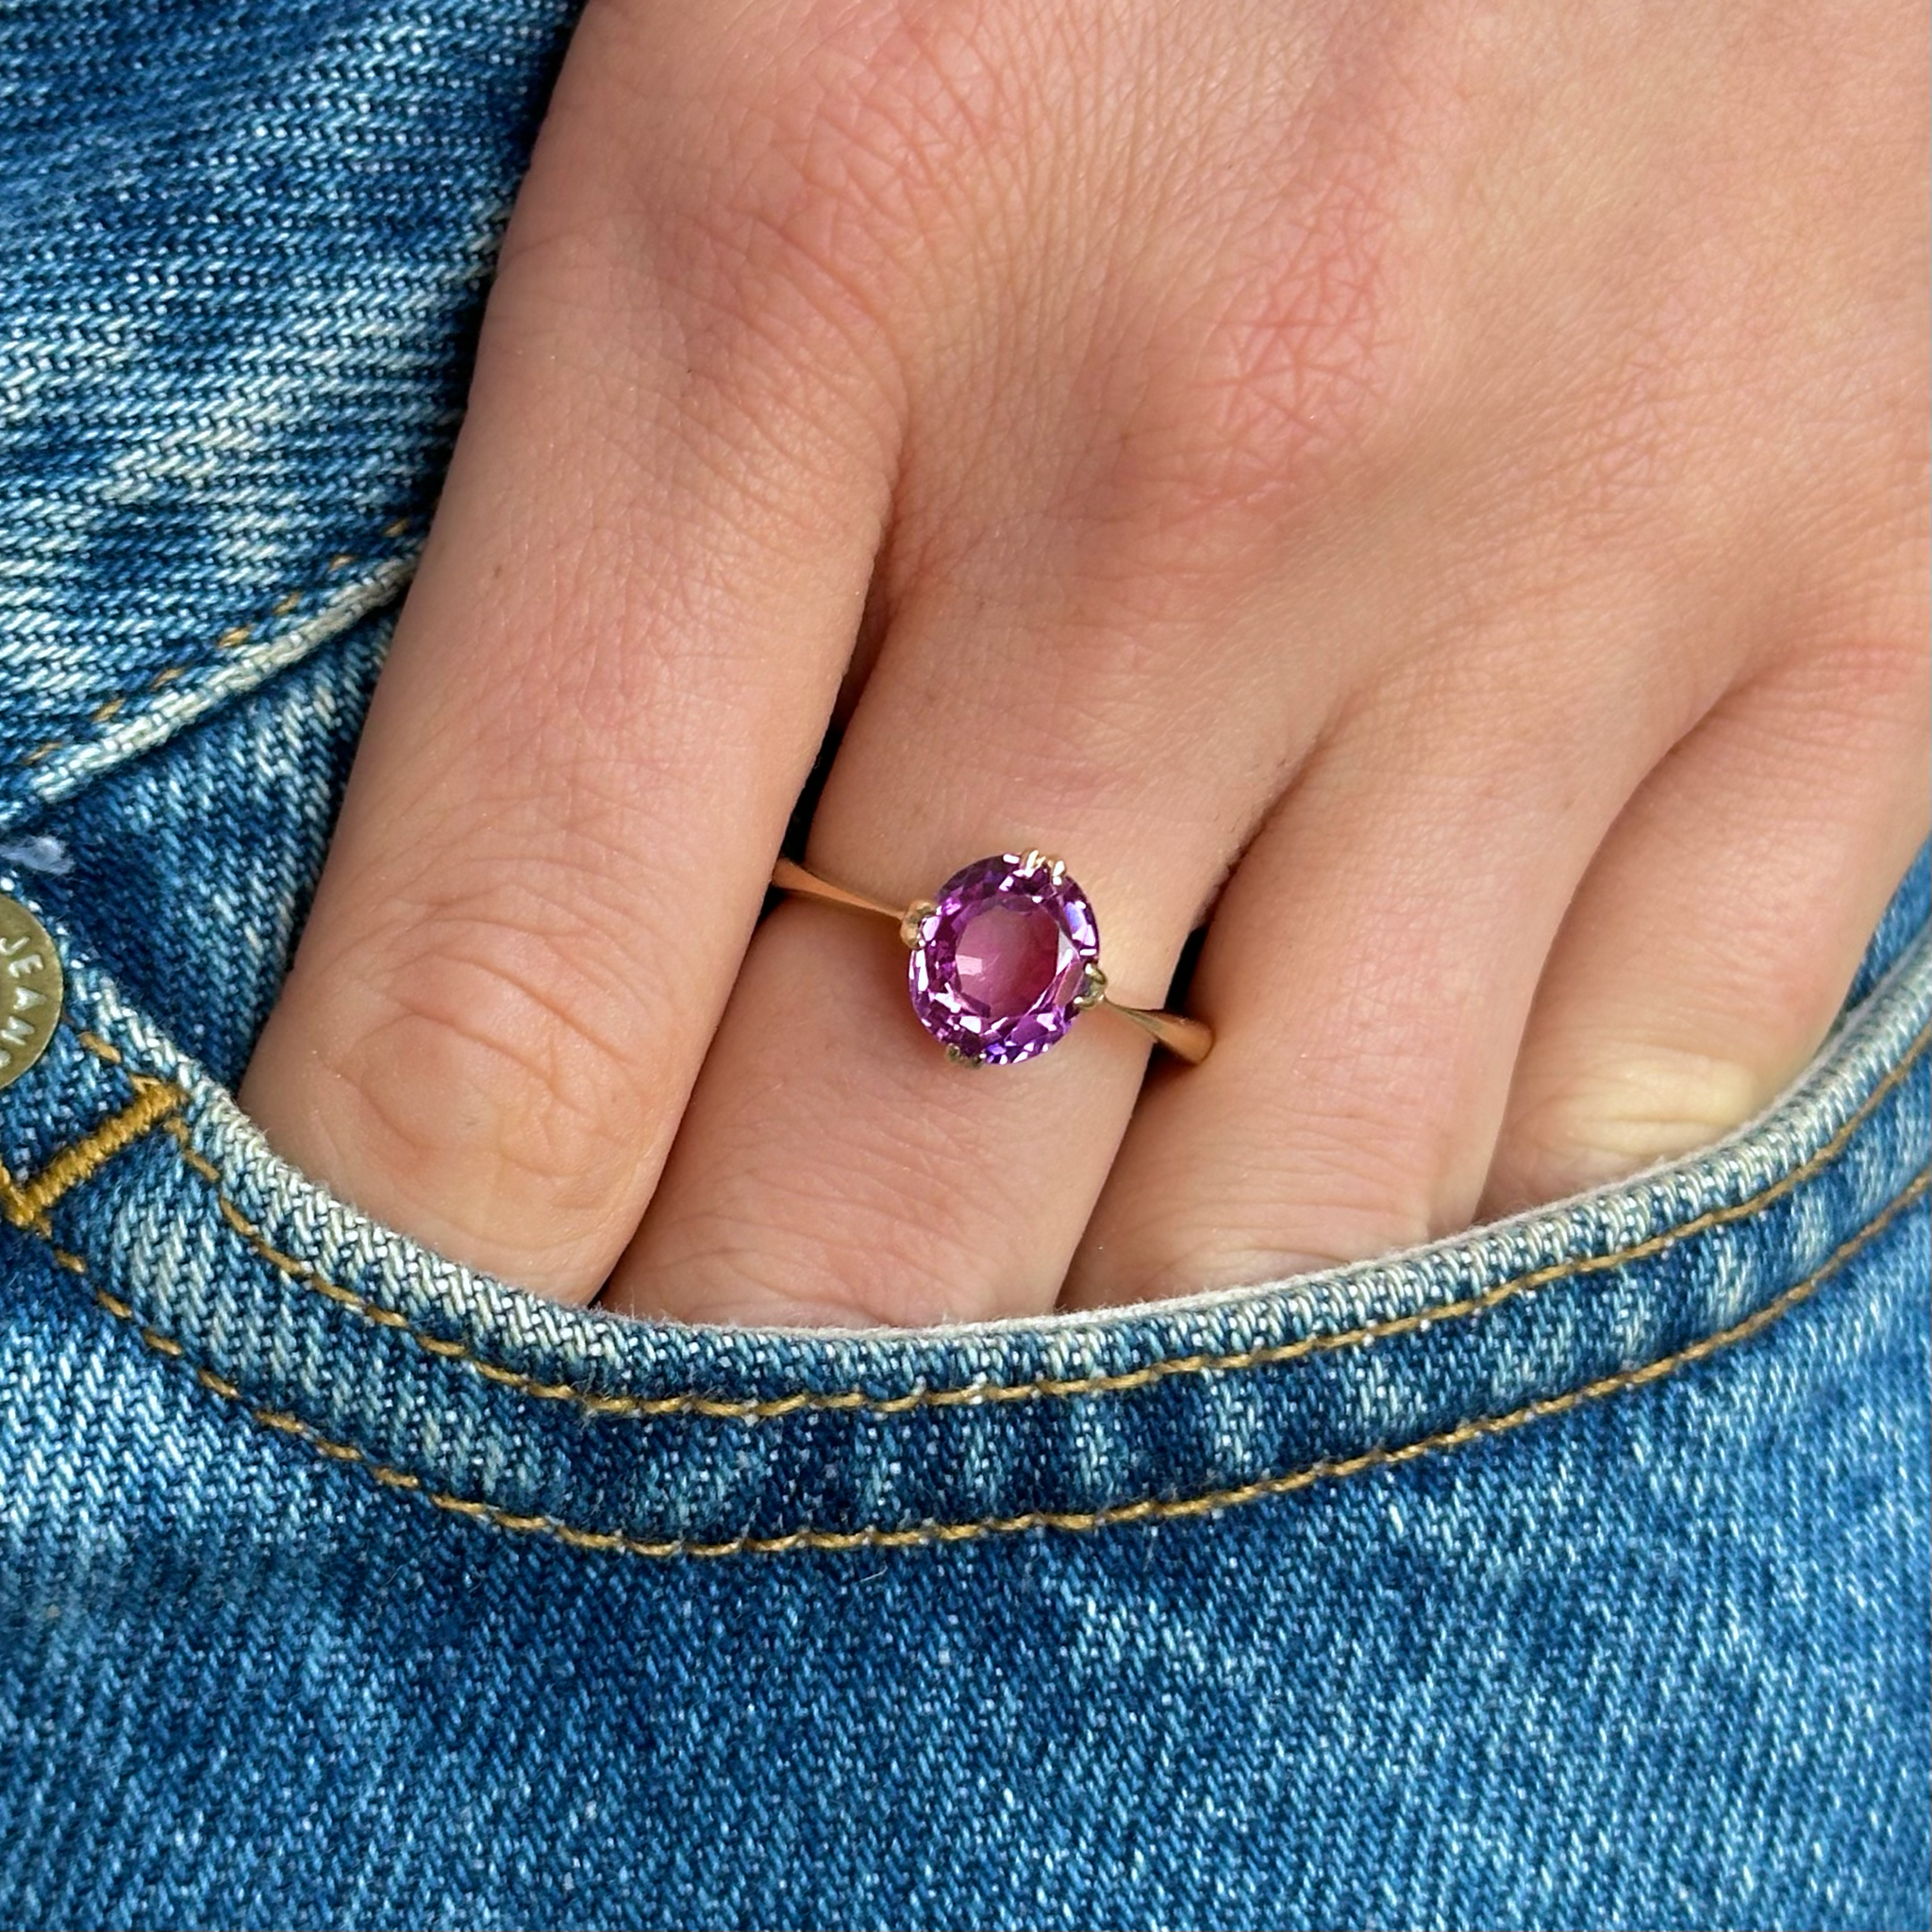 Vintage, 1940s Pink Sapphire Single-Stone Ring, worn on hand in pocket of jeans.